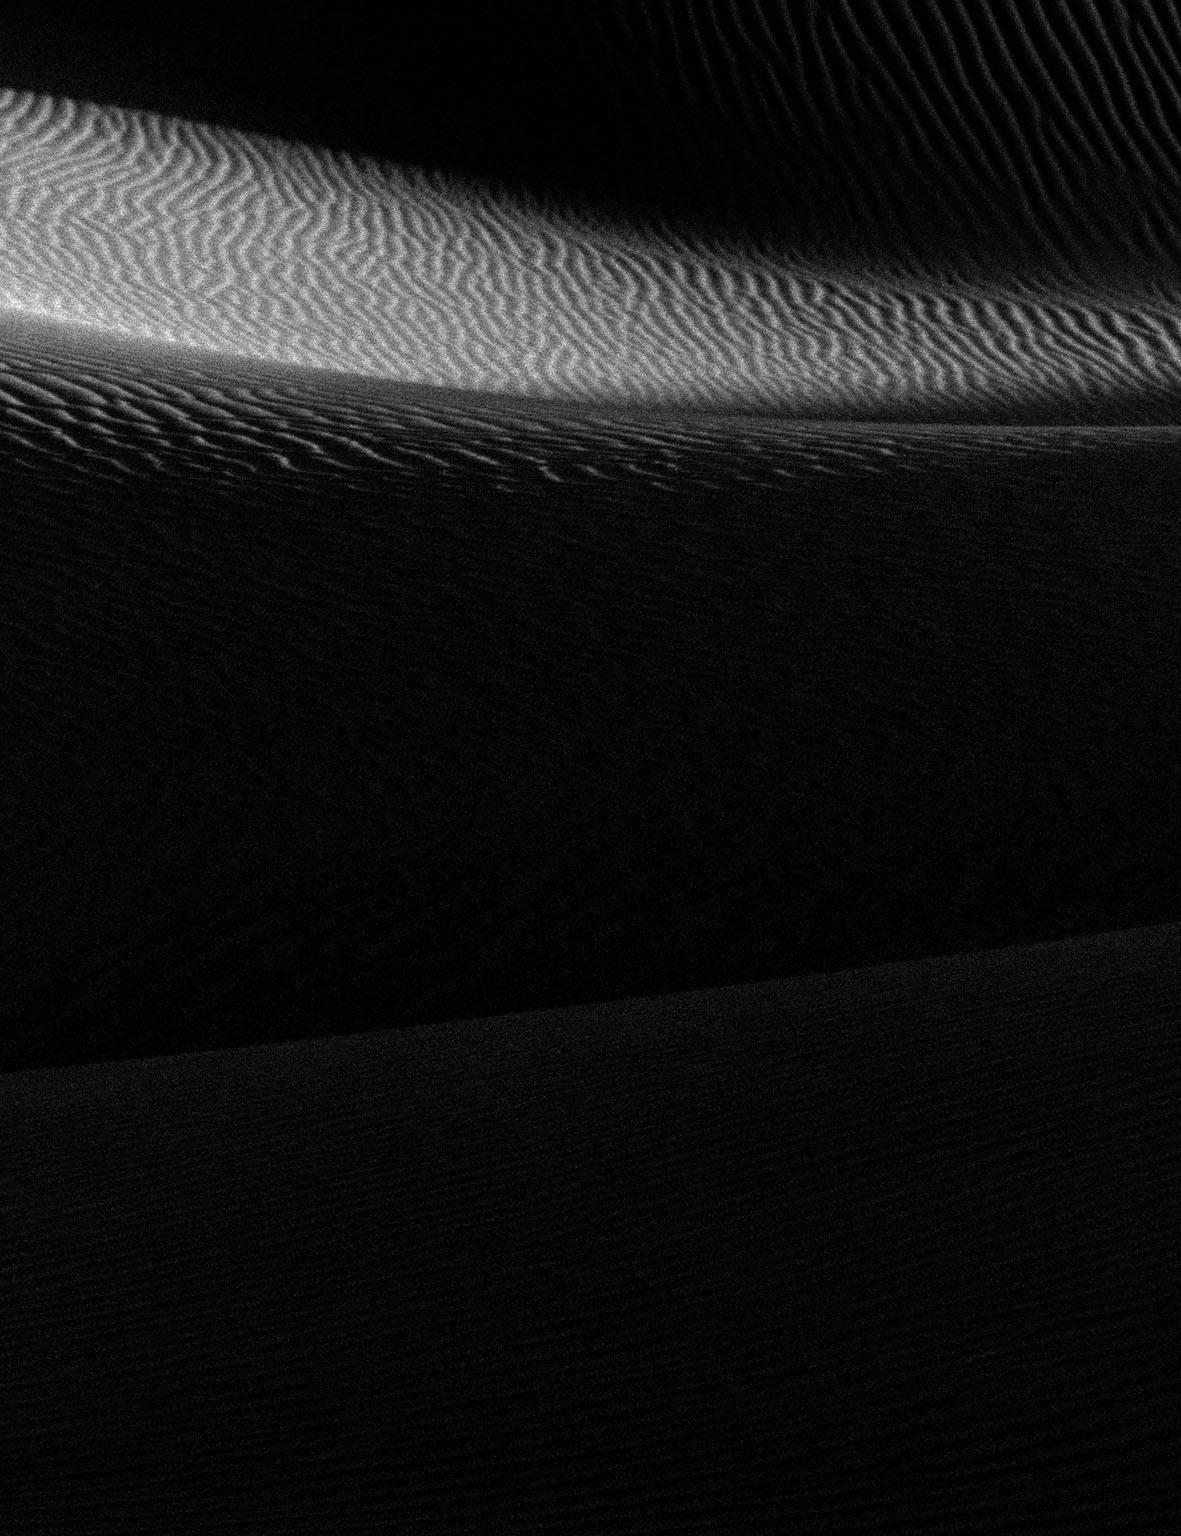 Sand Dunes Series #13 - Black Black and White Photograph by Keiji Iwai